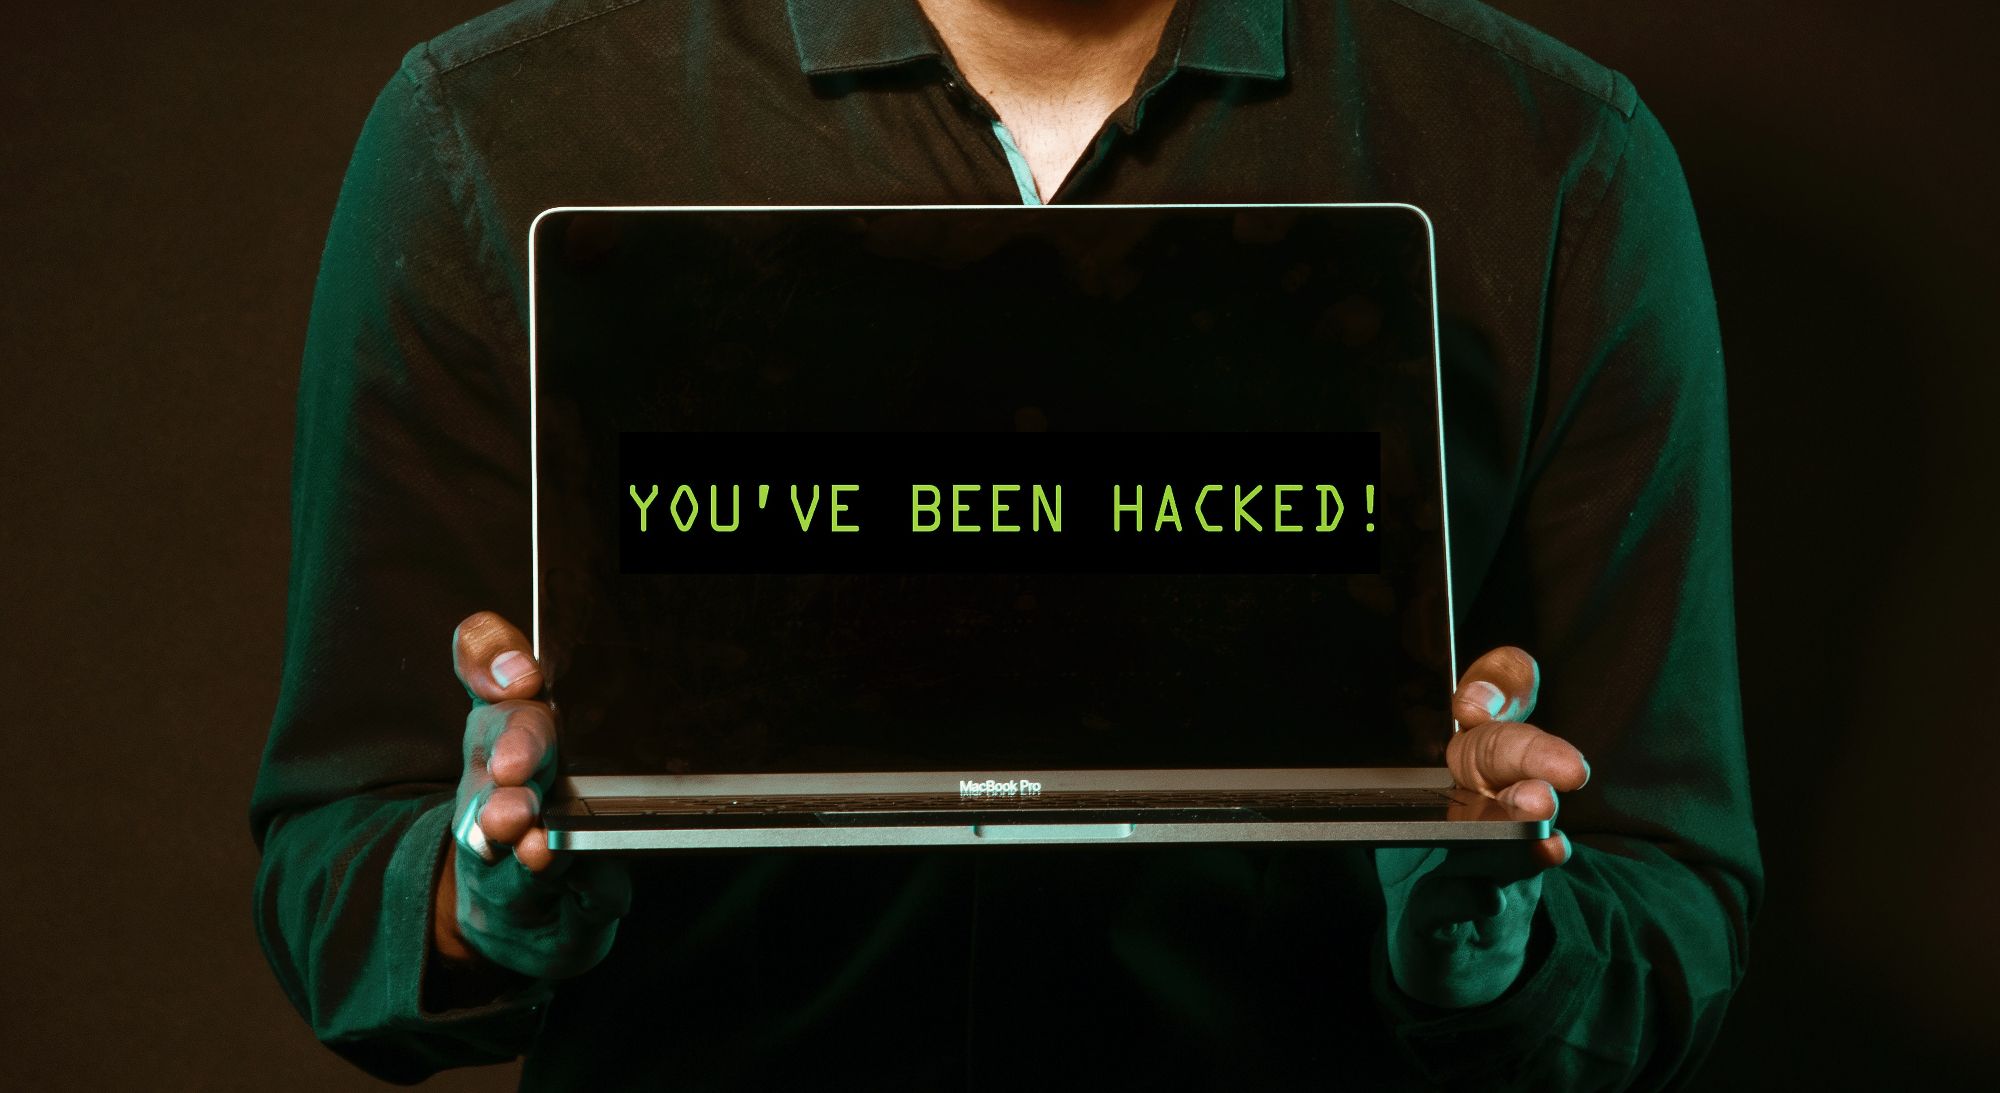 you've been hacked message showing on laptop screen